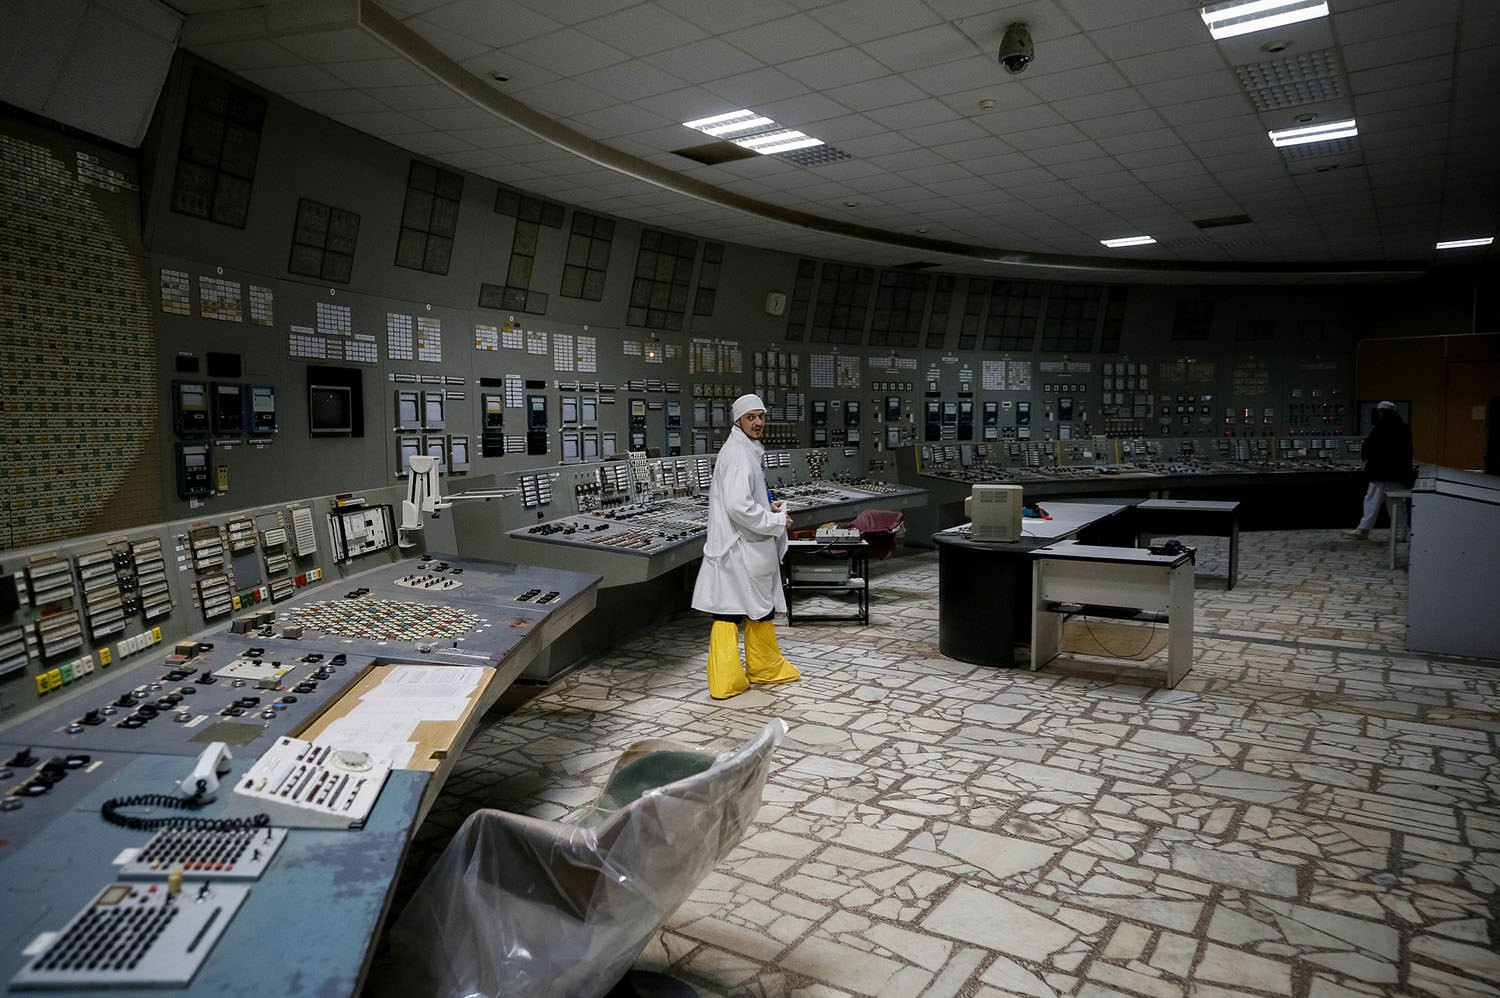 chernobyl 2019 employee in the control room of reactor 3